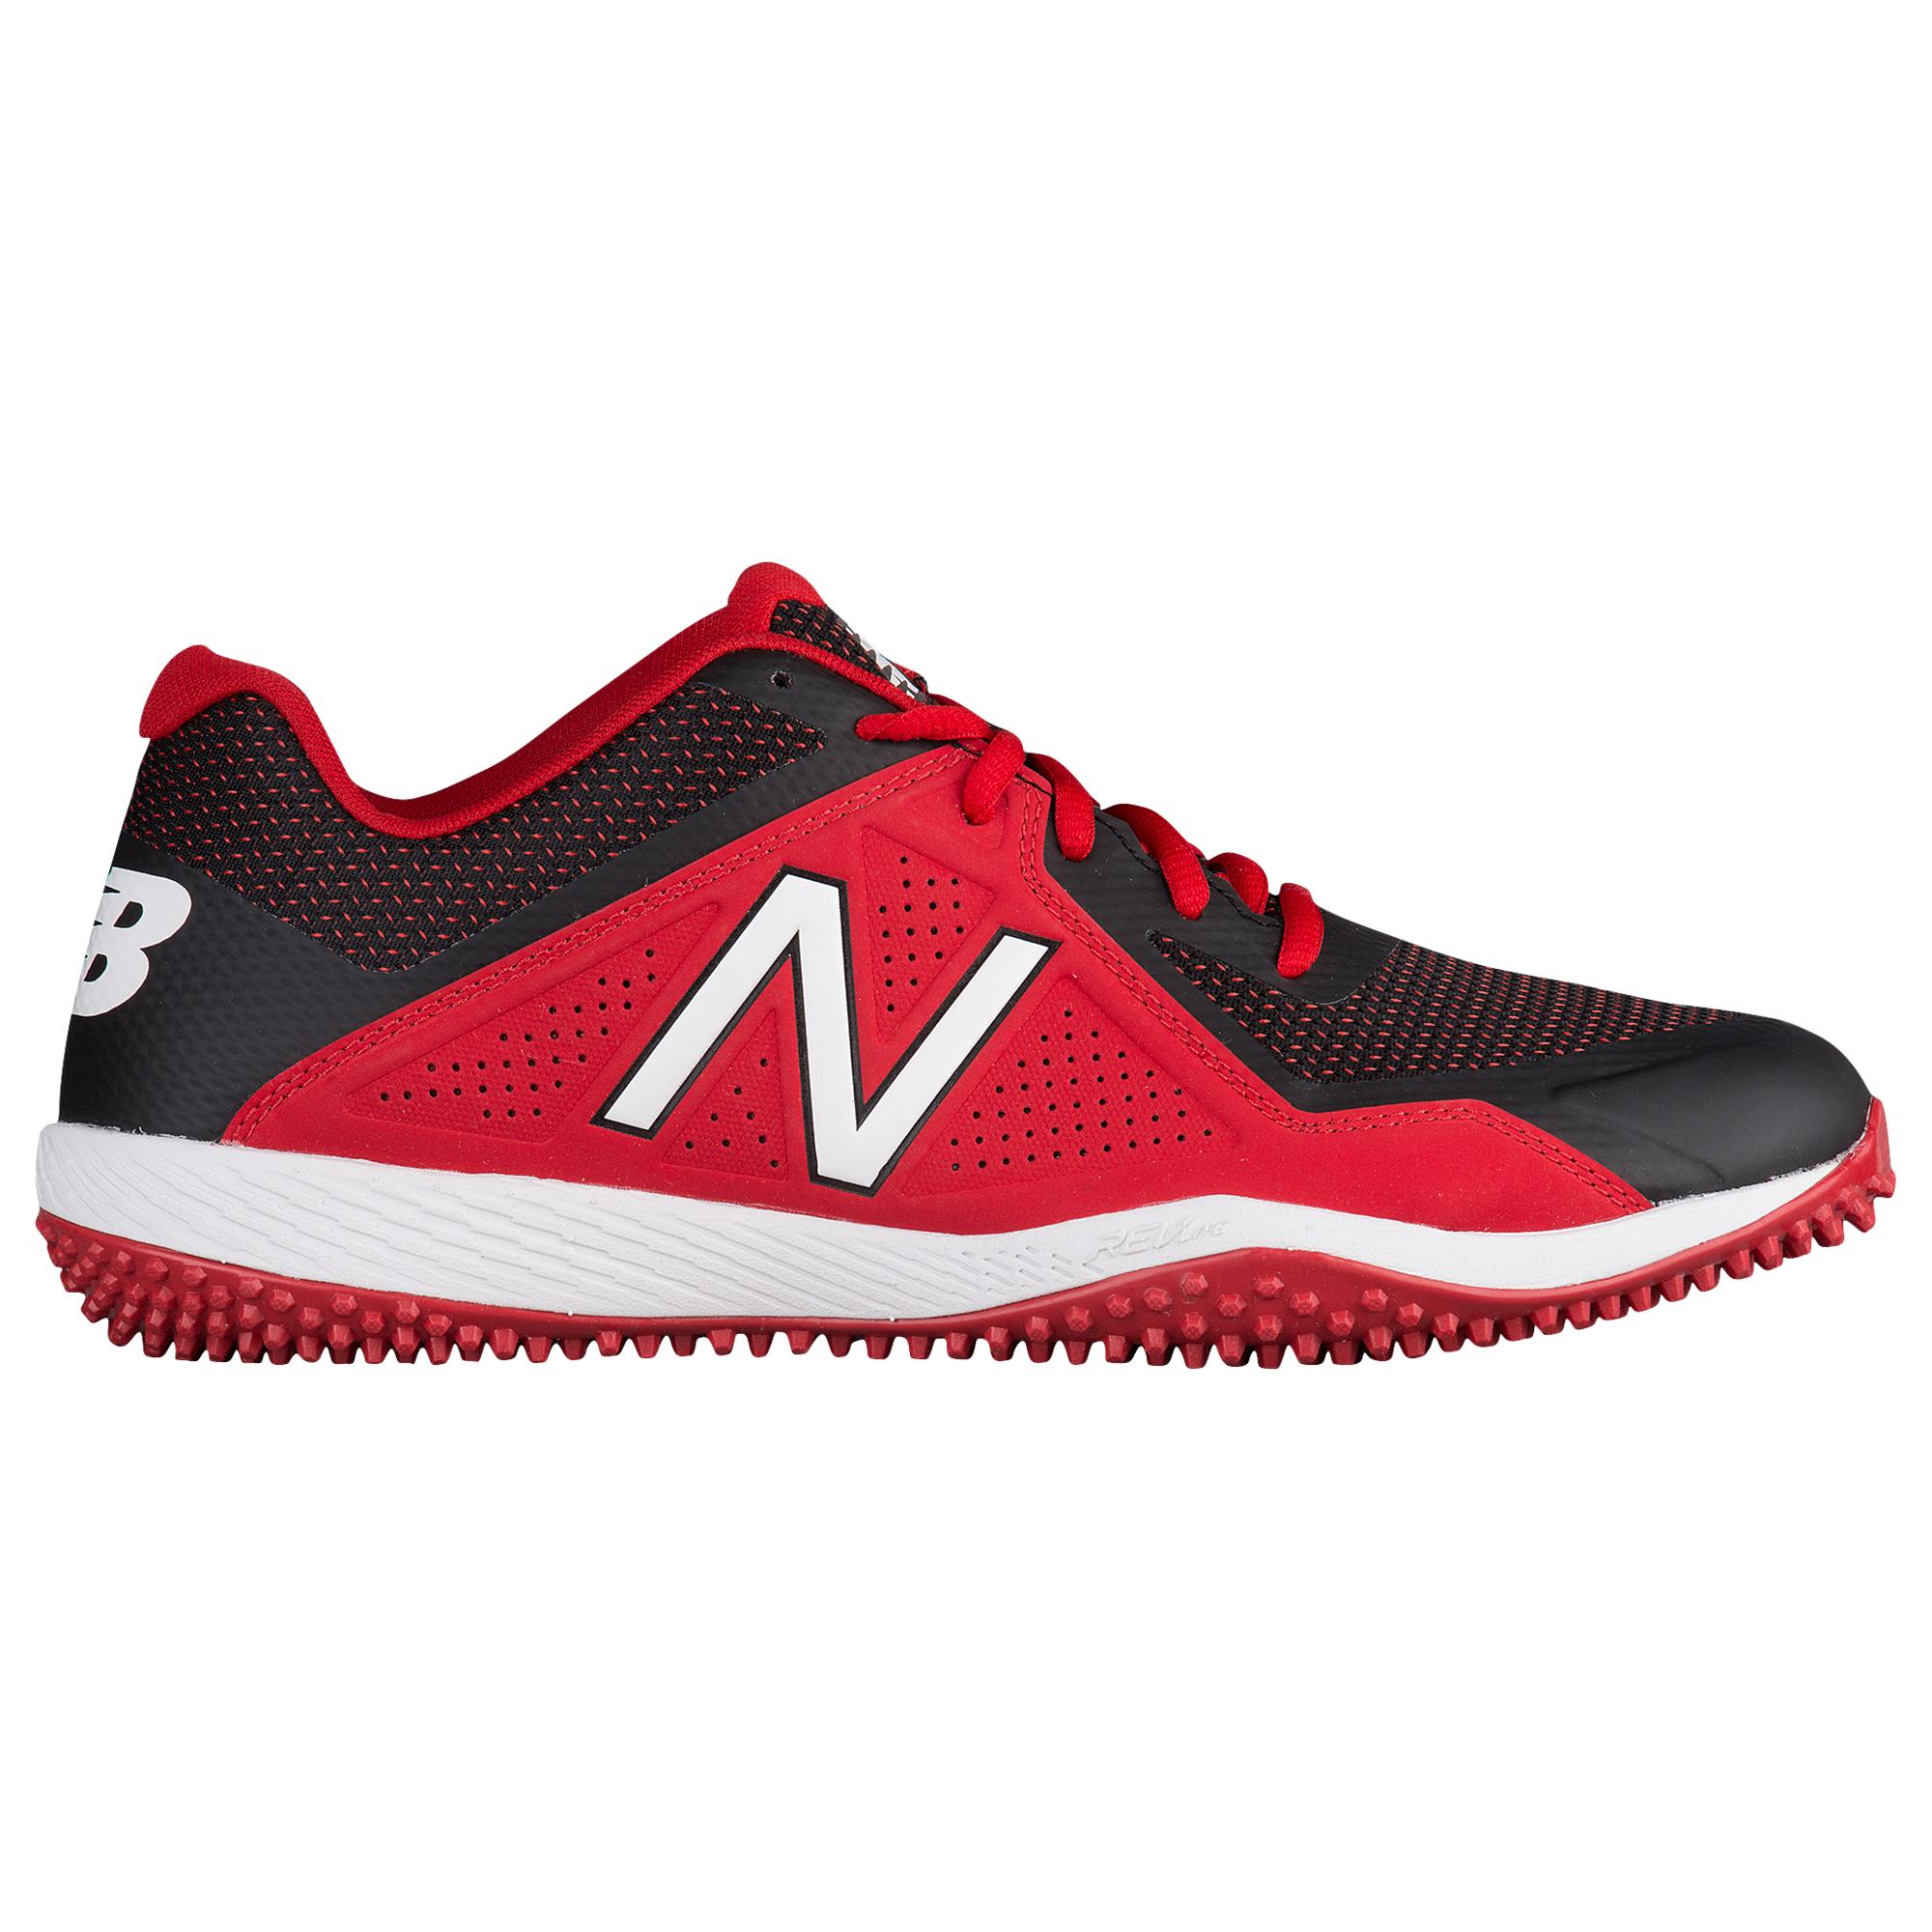 New Balance Synthetic 4040v4 Turf Turf Shoes in Black/Red (Red) for Men ...